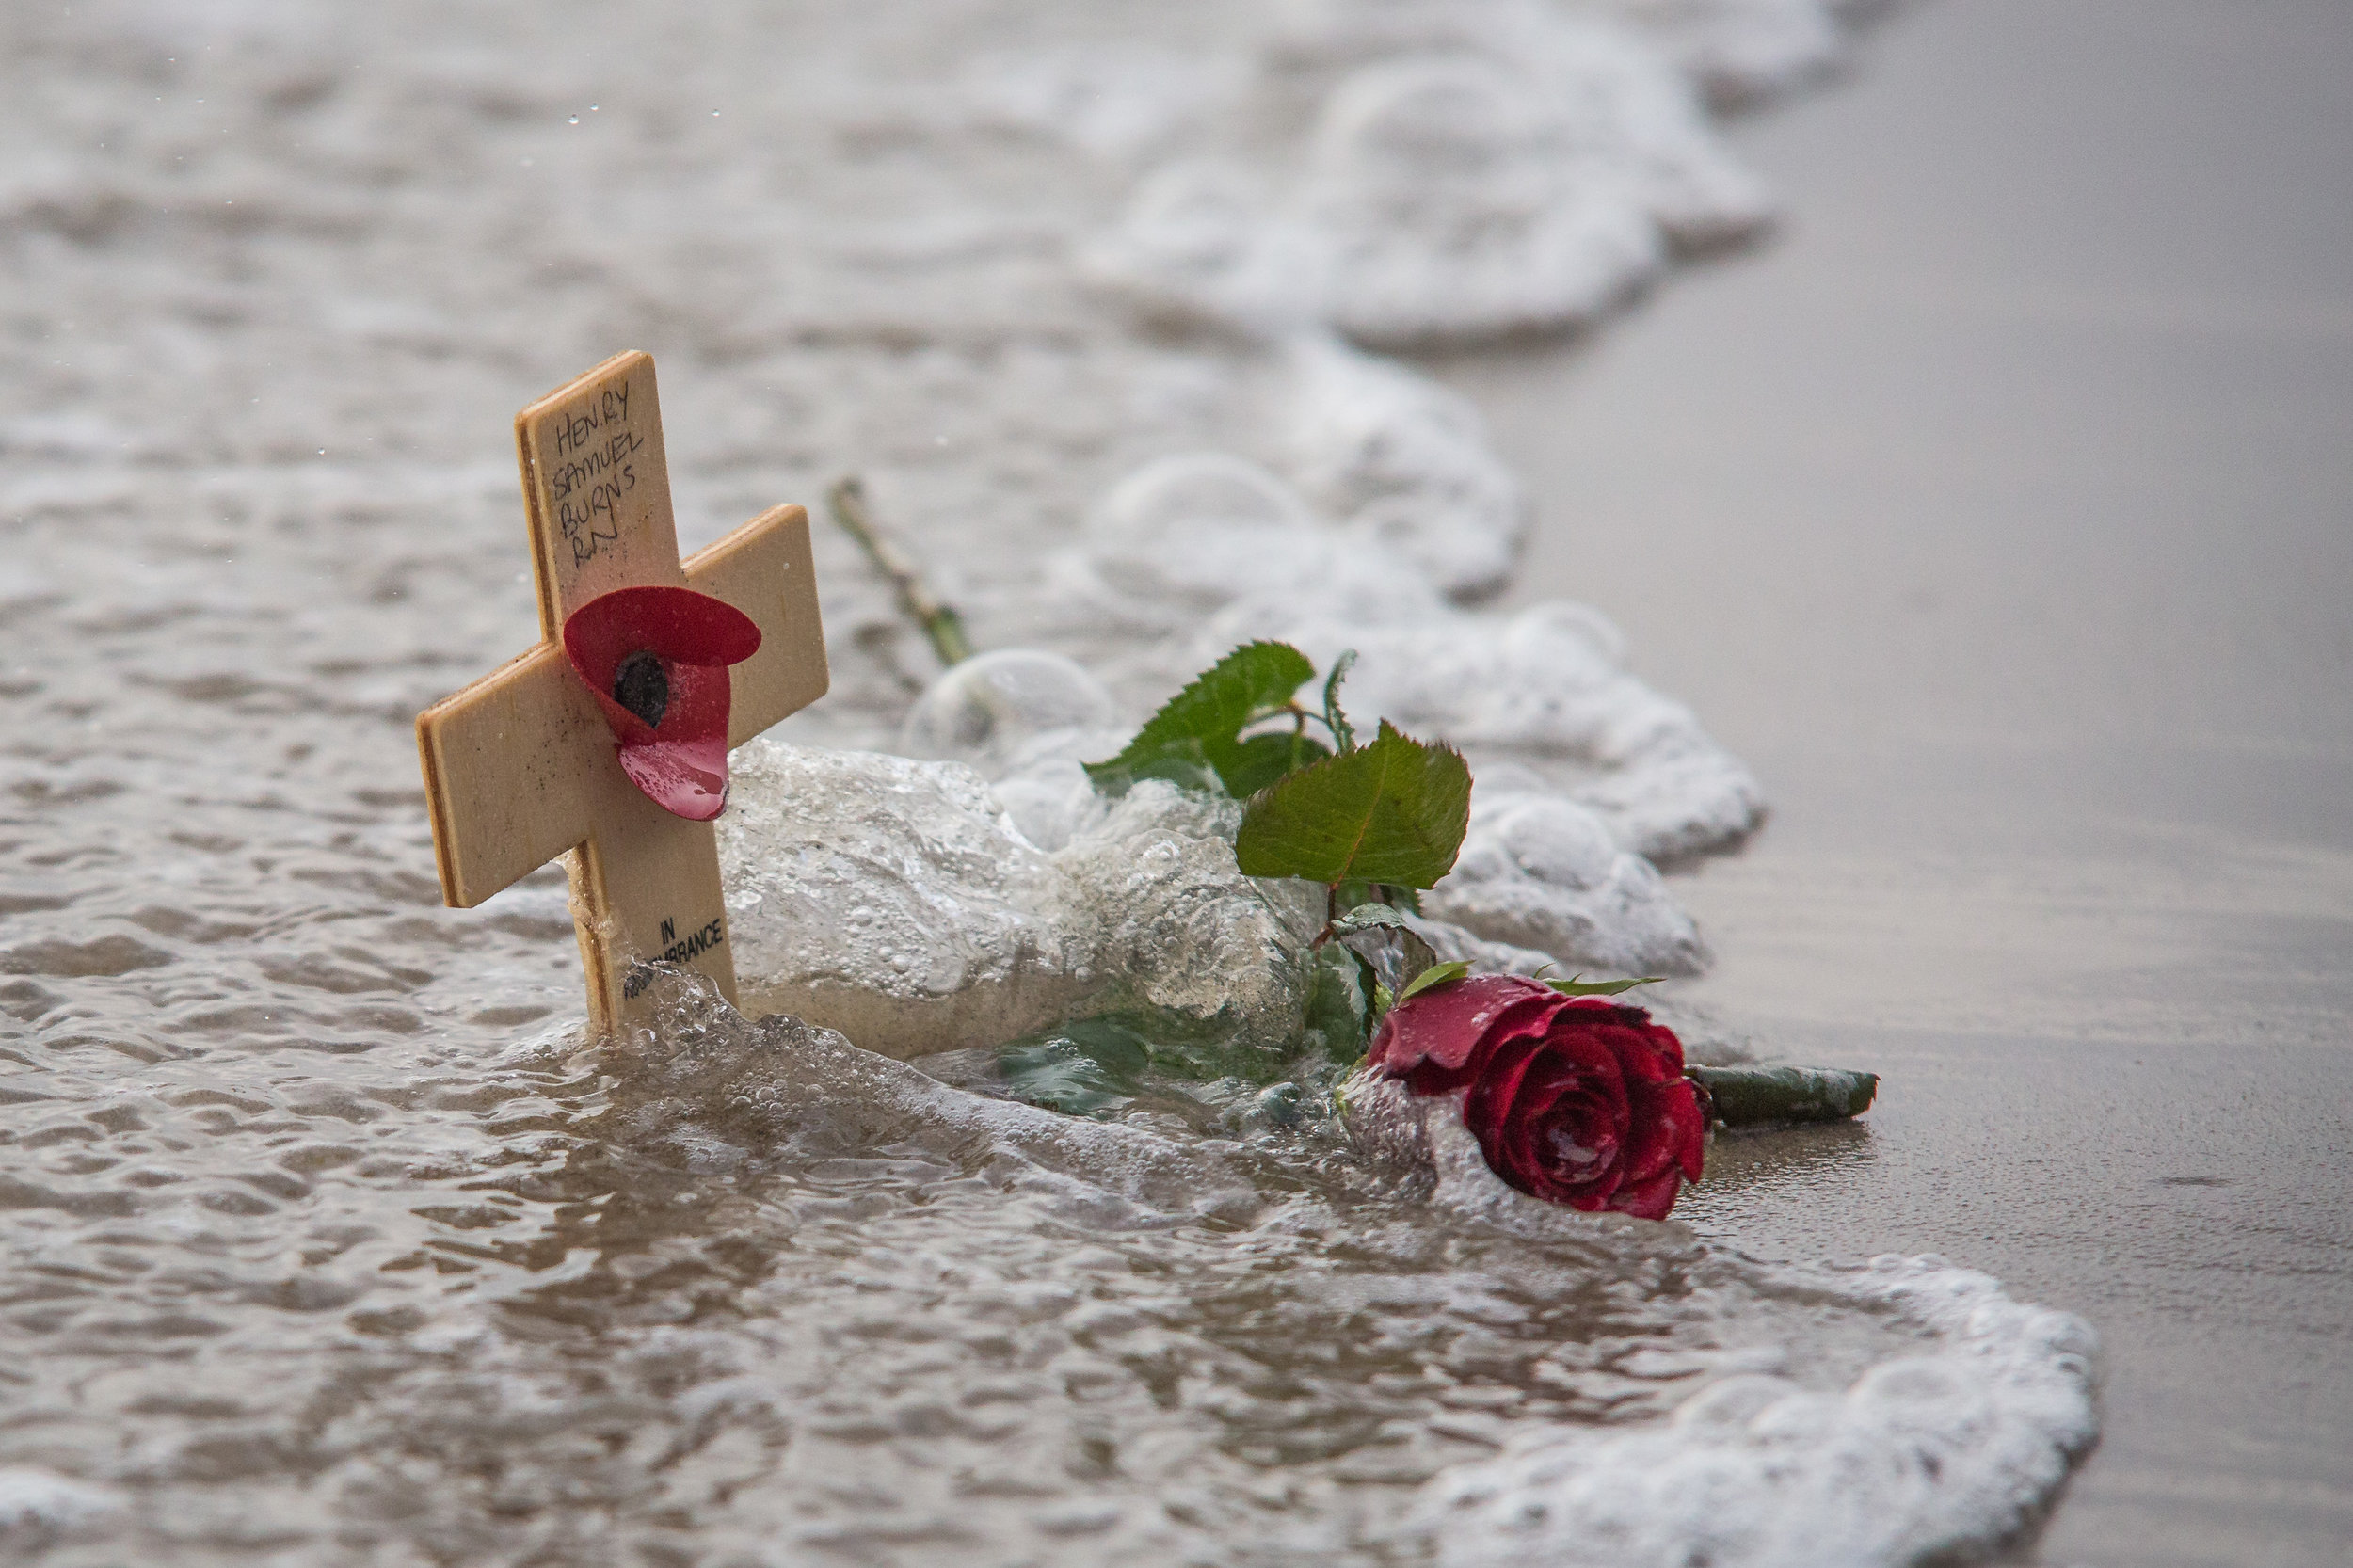  A Remembrance Cross and single red rose are washed by the seas at Sunny Sands beach in Folkestone on the 100th anniversary of The Armistice that ended the First World War.
Photo by Manu Palomeque, 11 November 2018
 